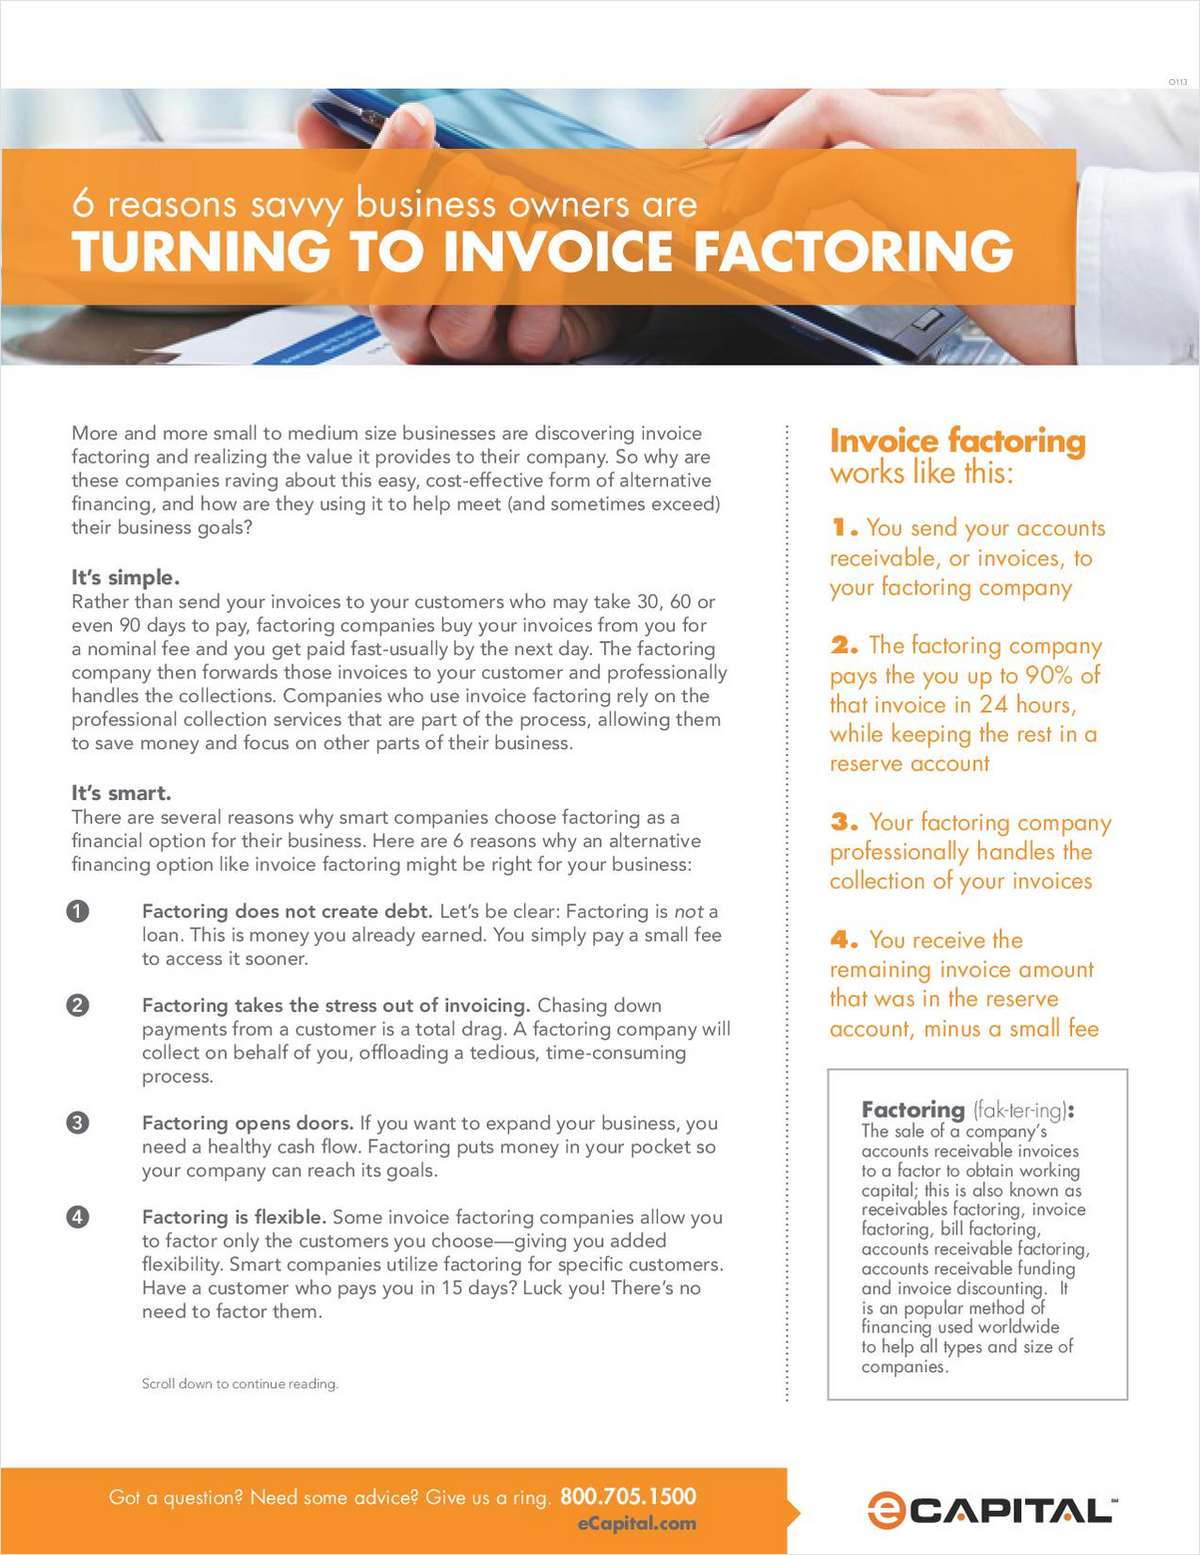 6 Reasons Savvy Small Business Owners are Turning to Invoice Factoring